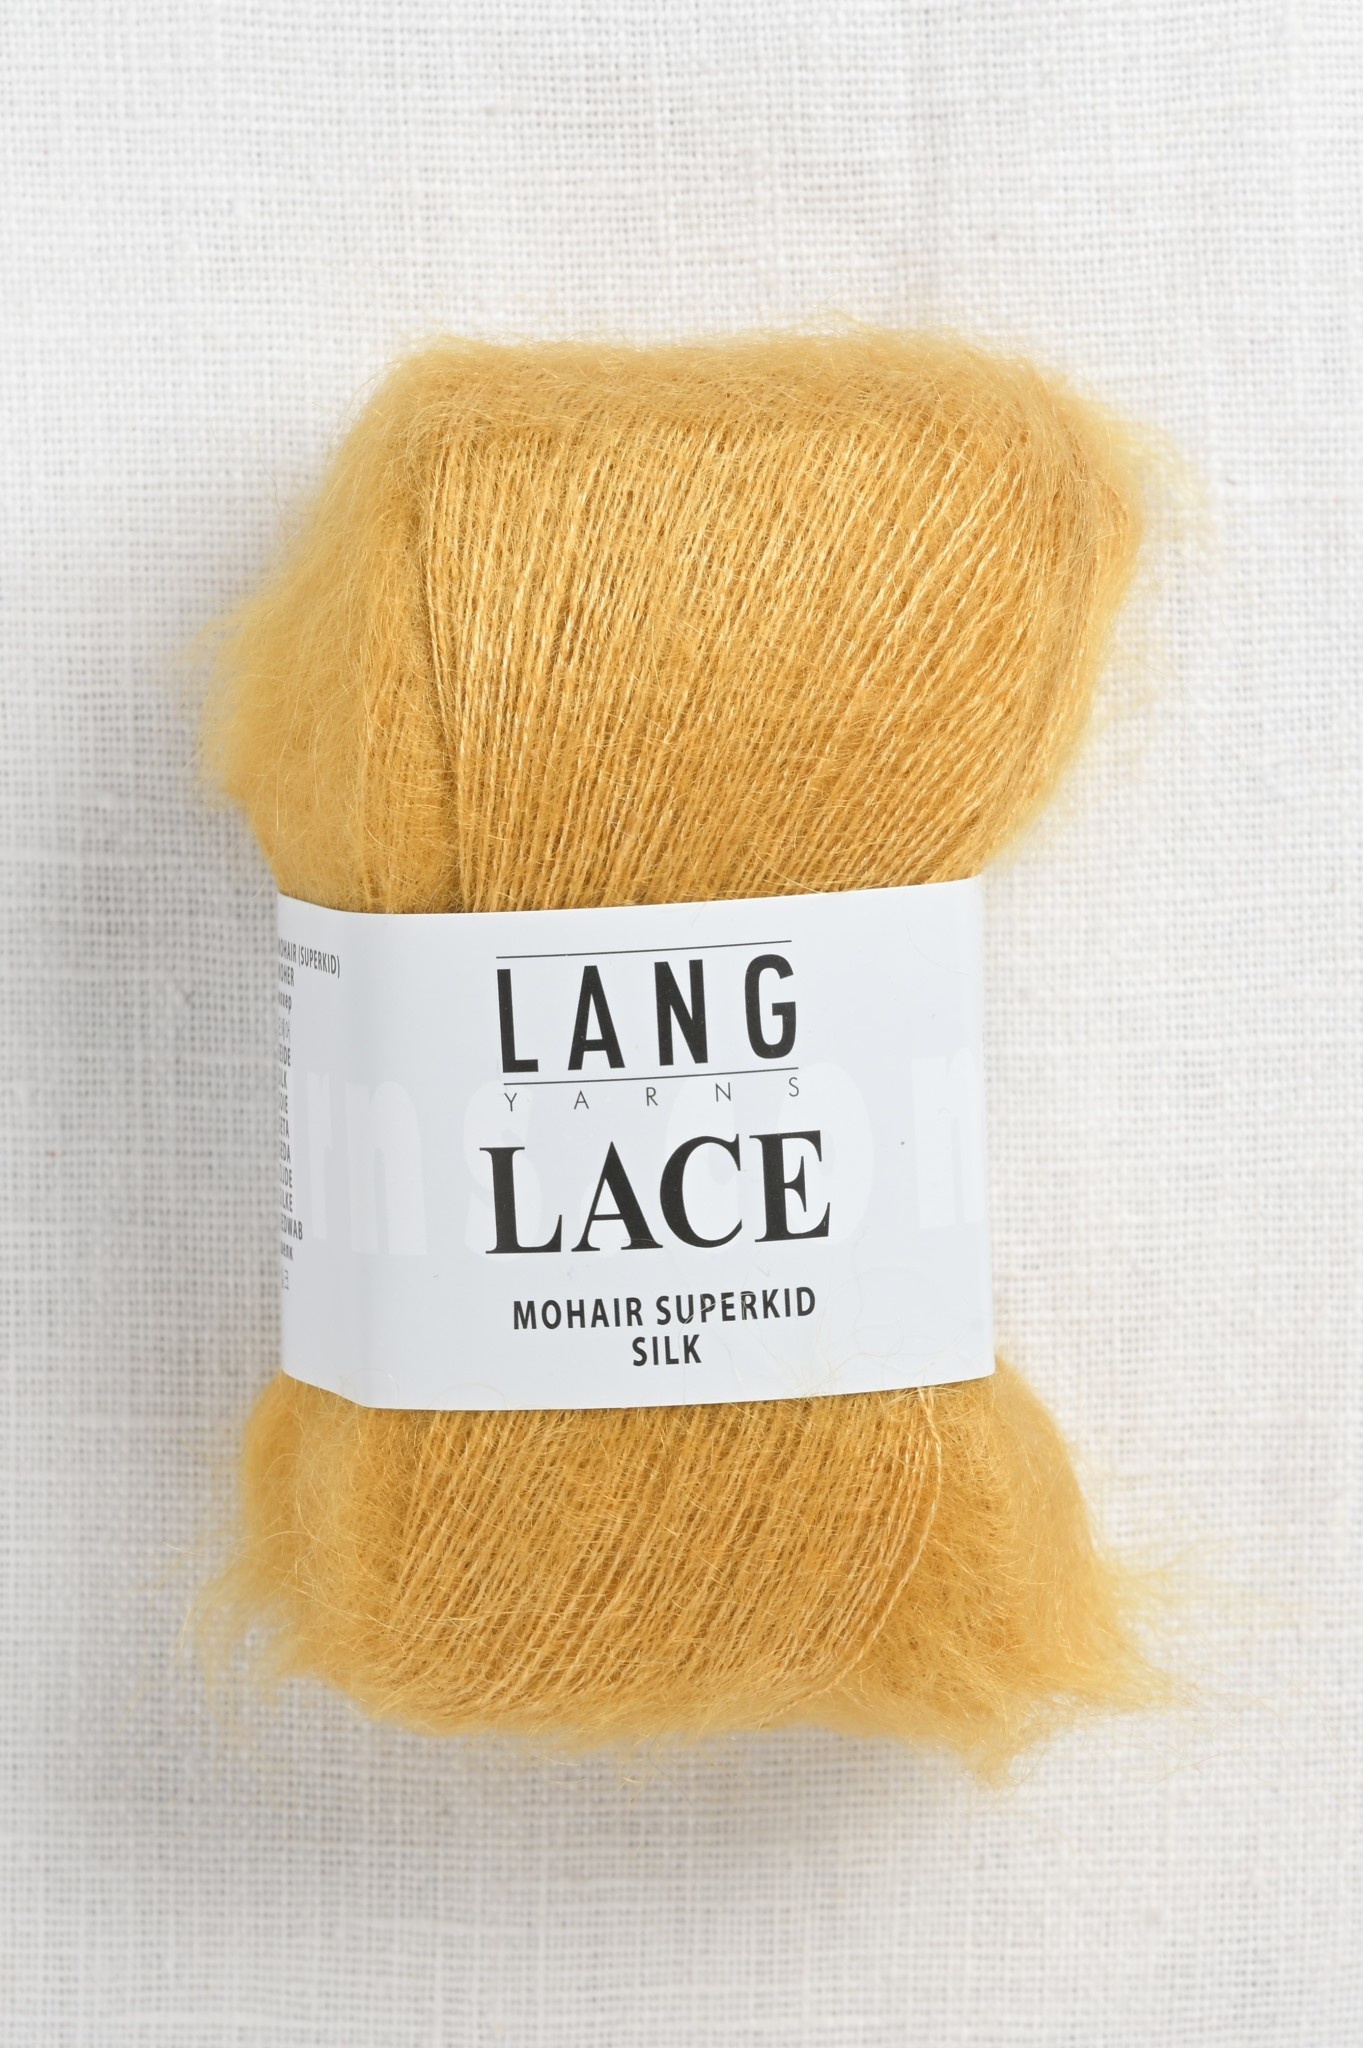 Buitenlander afschaffen diamant Lang Lace 50 Golden - Wool and Company Fine Yarn